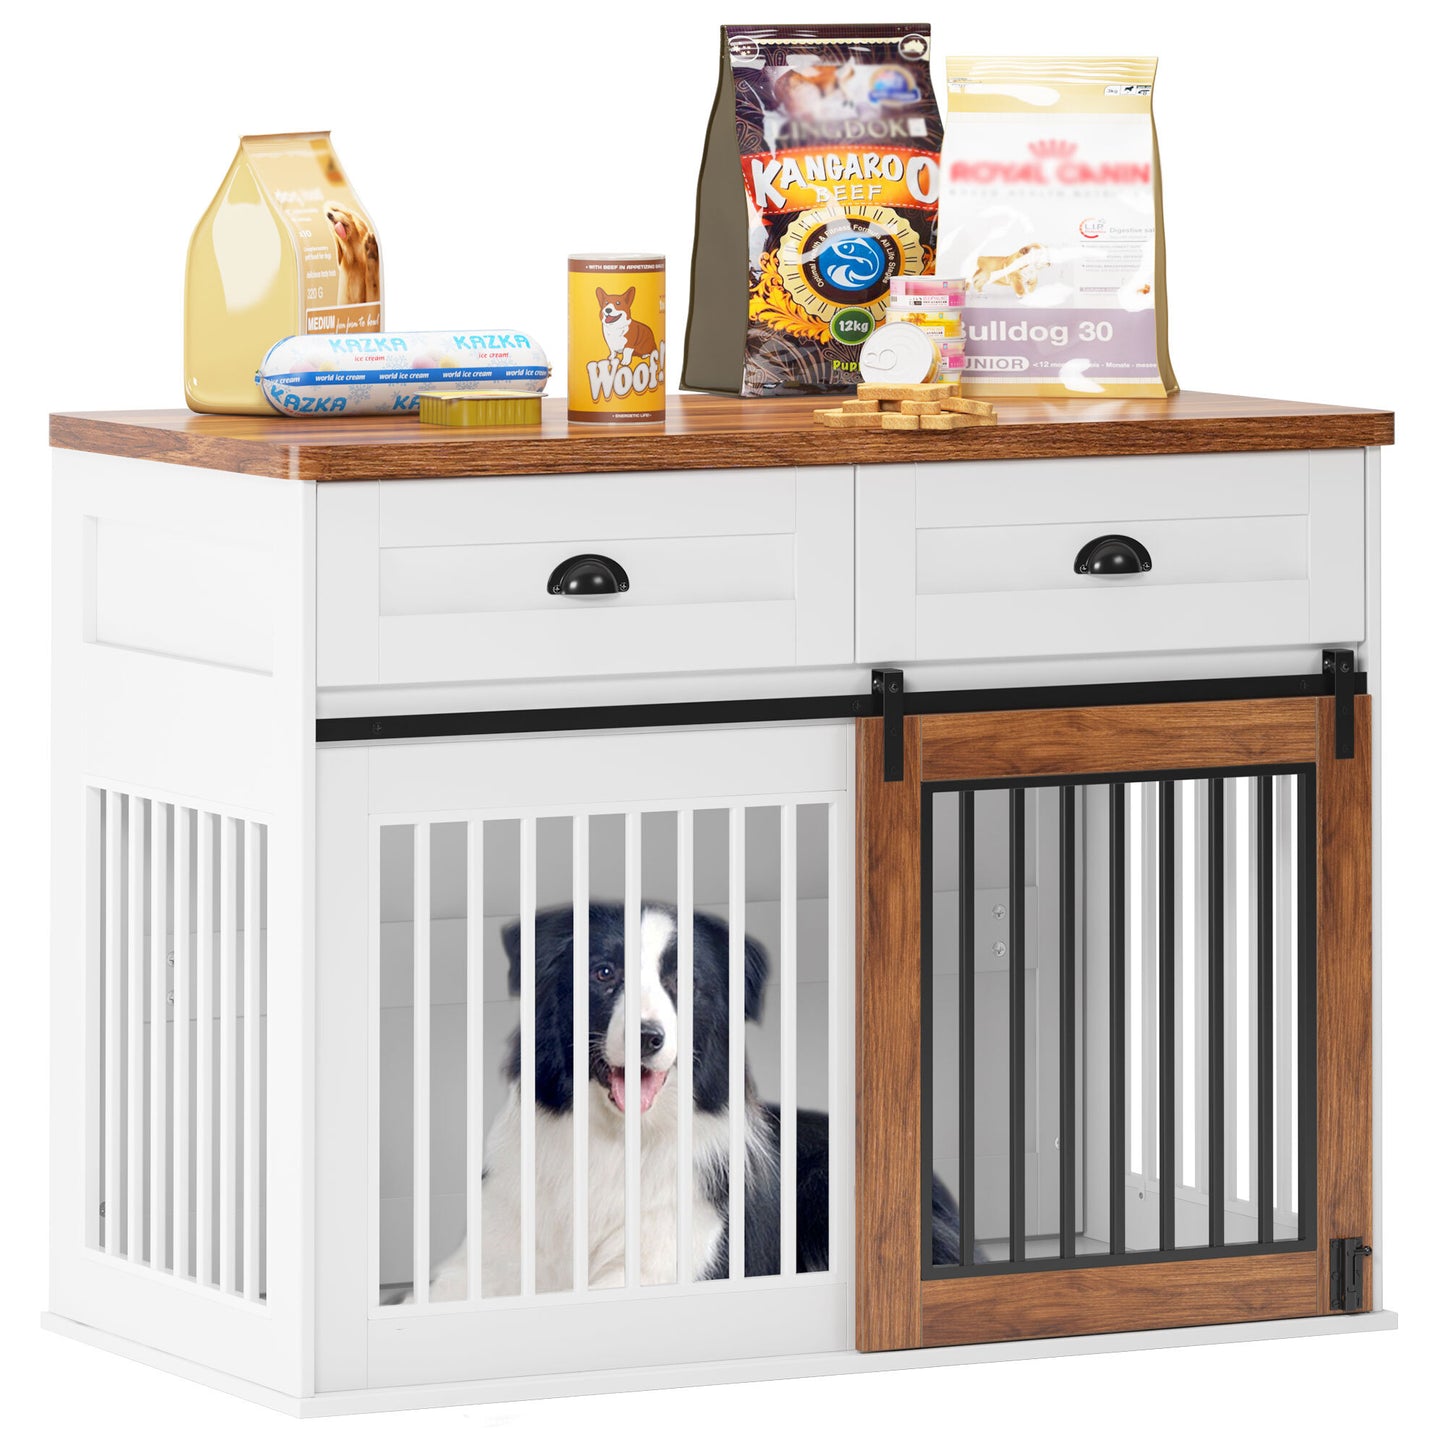 SogesPower 44 in Dog Crate Furniture with Sliding Barn Door, Wooden Dog Kennel with 2 Drawers and Lock, Indoor Dog House for Small/Medium/Large Dogs